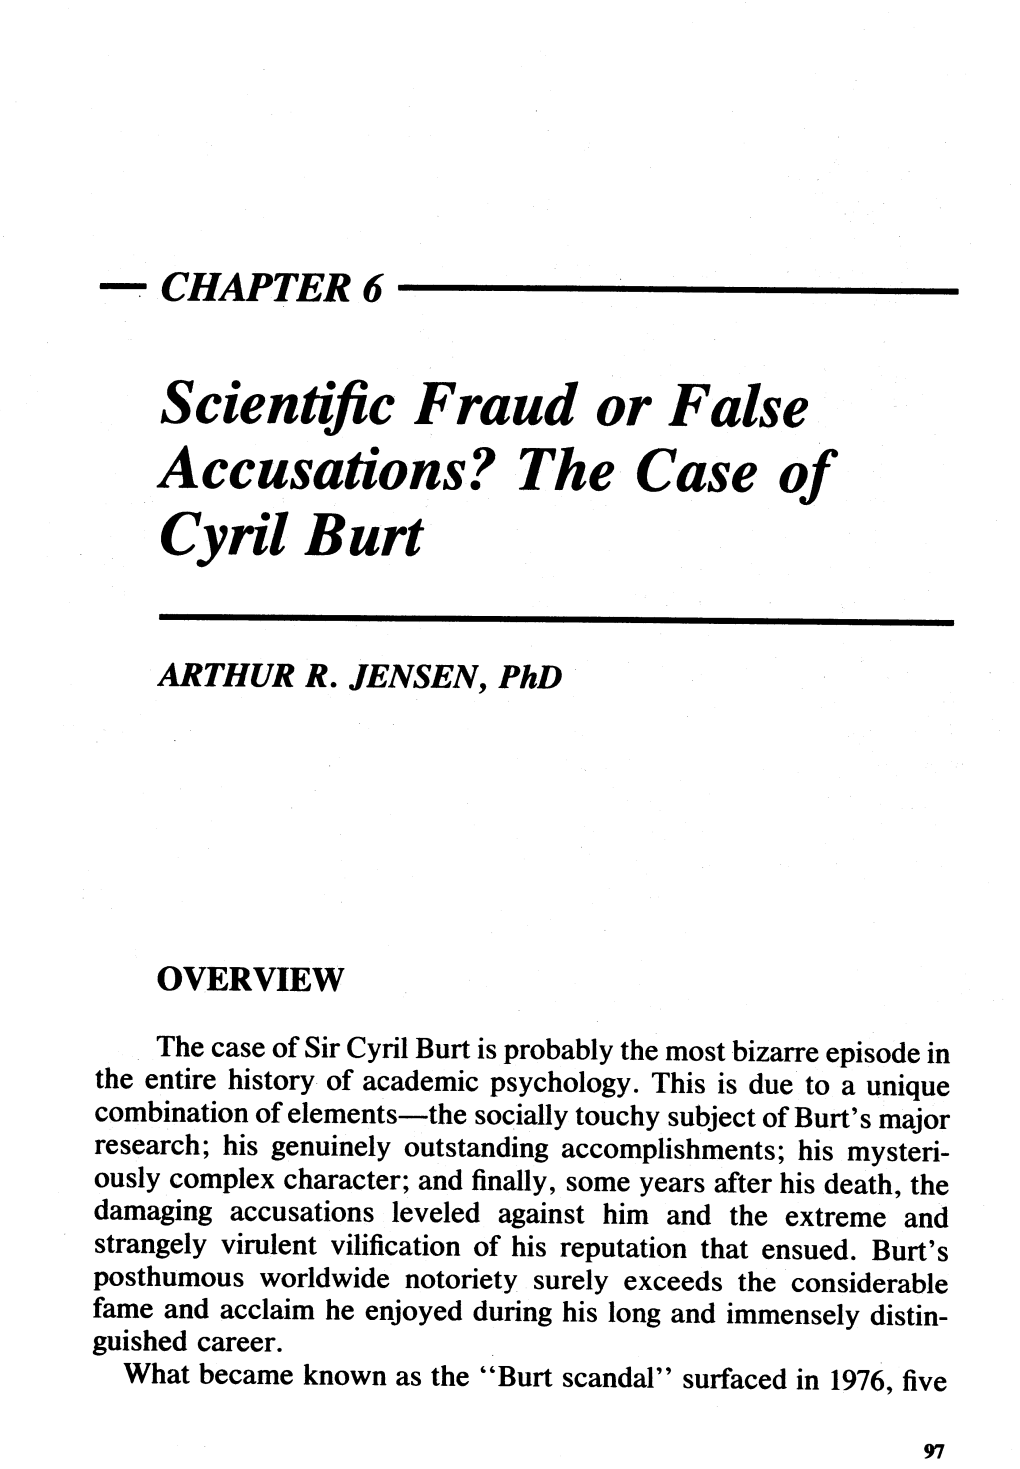 Scientific Fraud Or False Accusations? Thecase of Cyril Burt